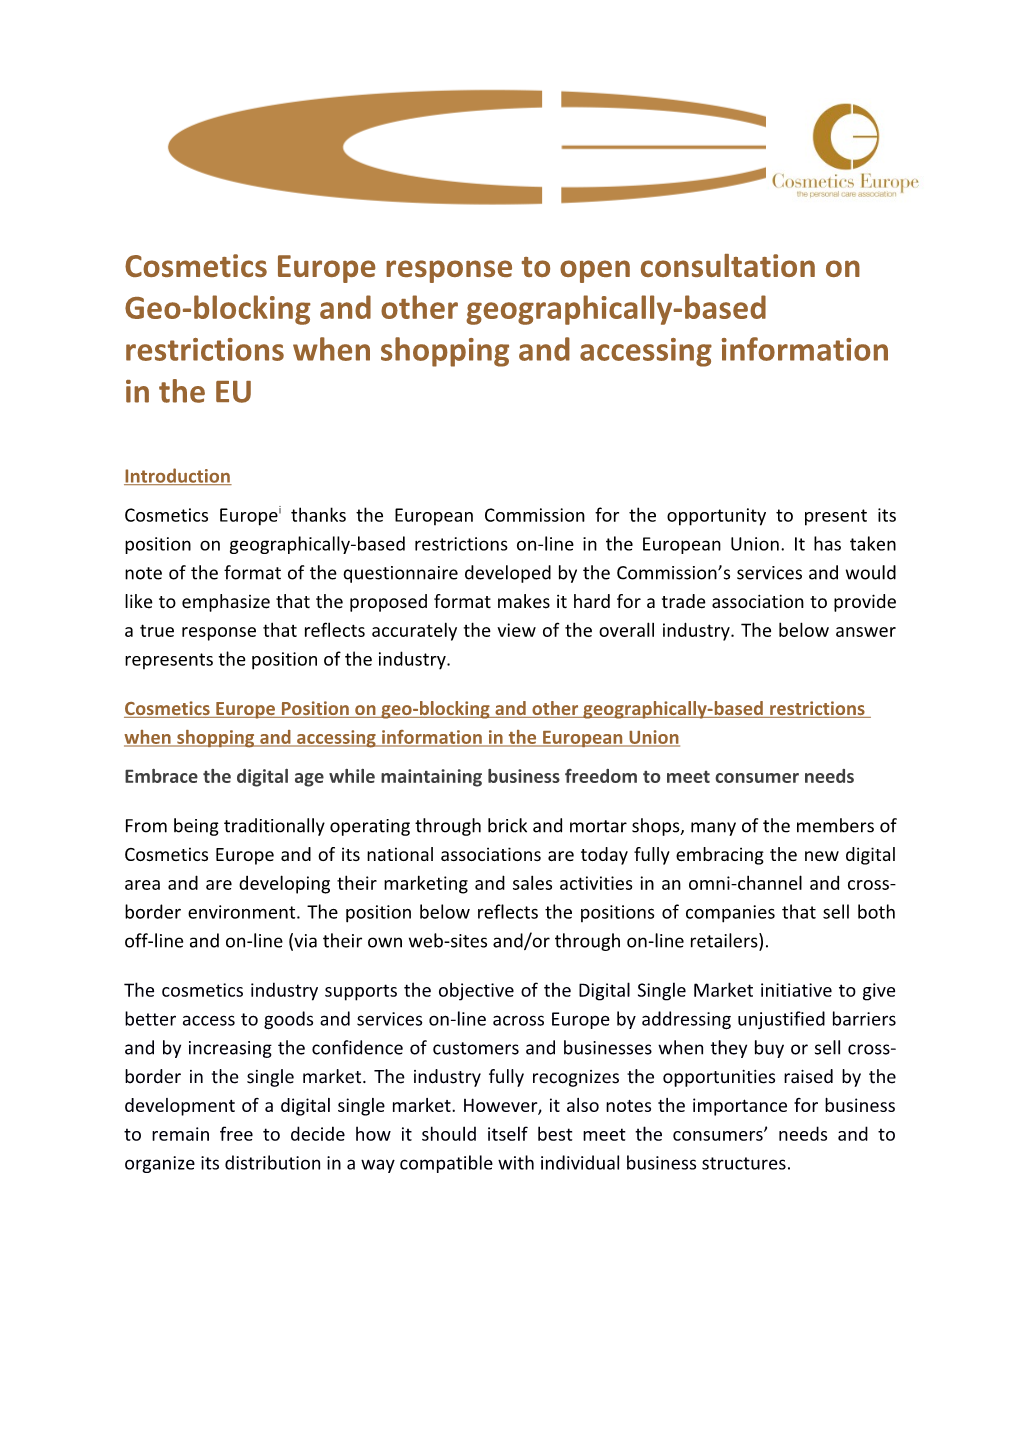 Cosmetics Europe Response to Open Consultation on Geo-Blocking and Other Geographically-Based